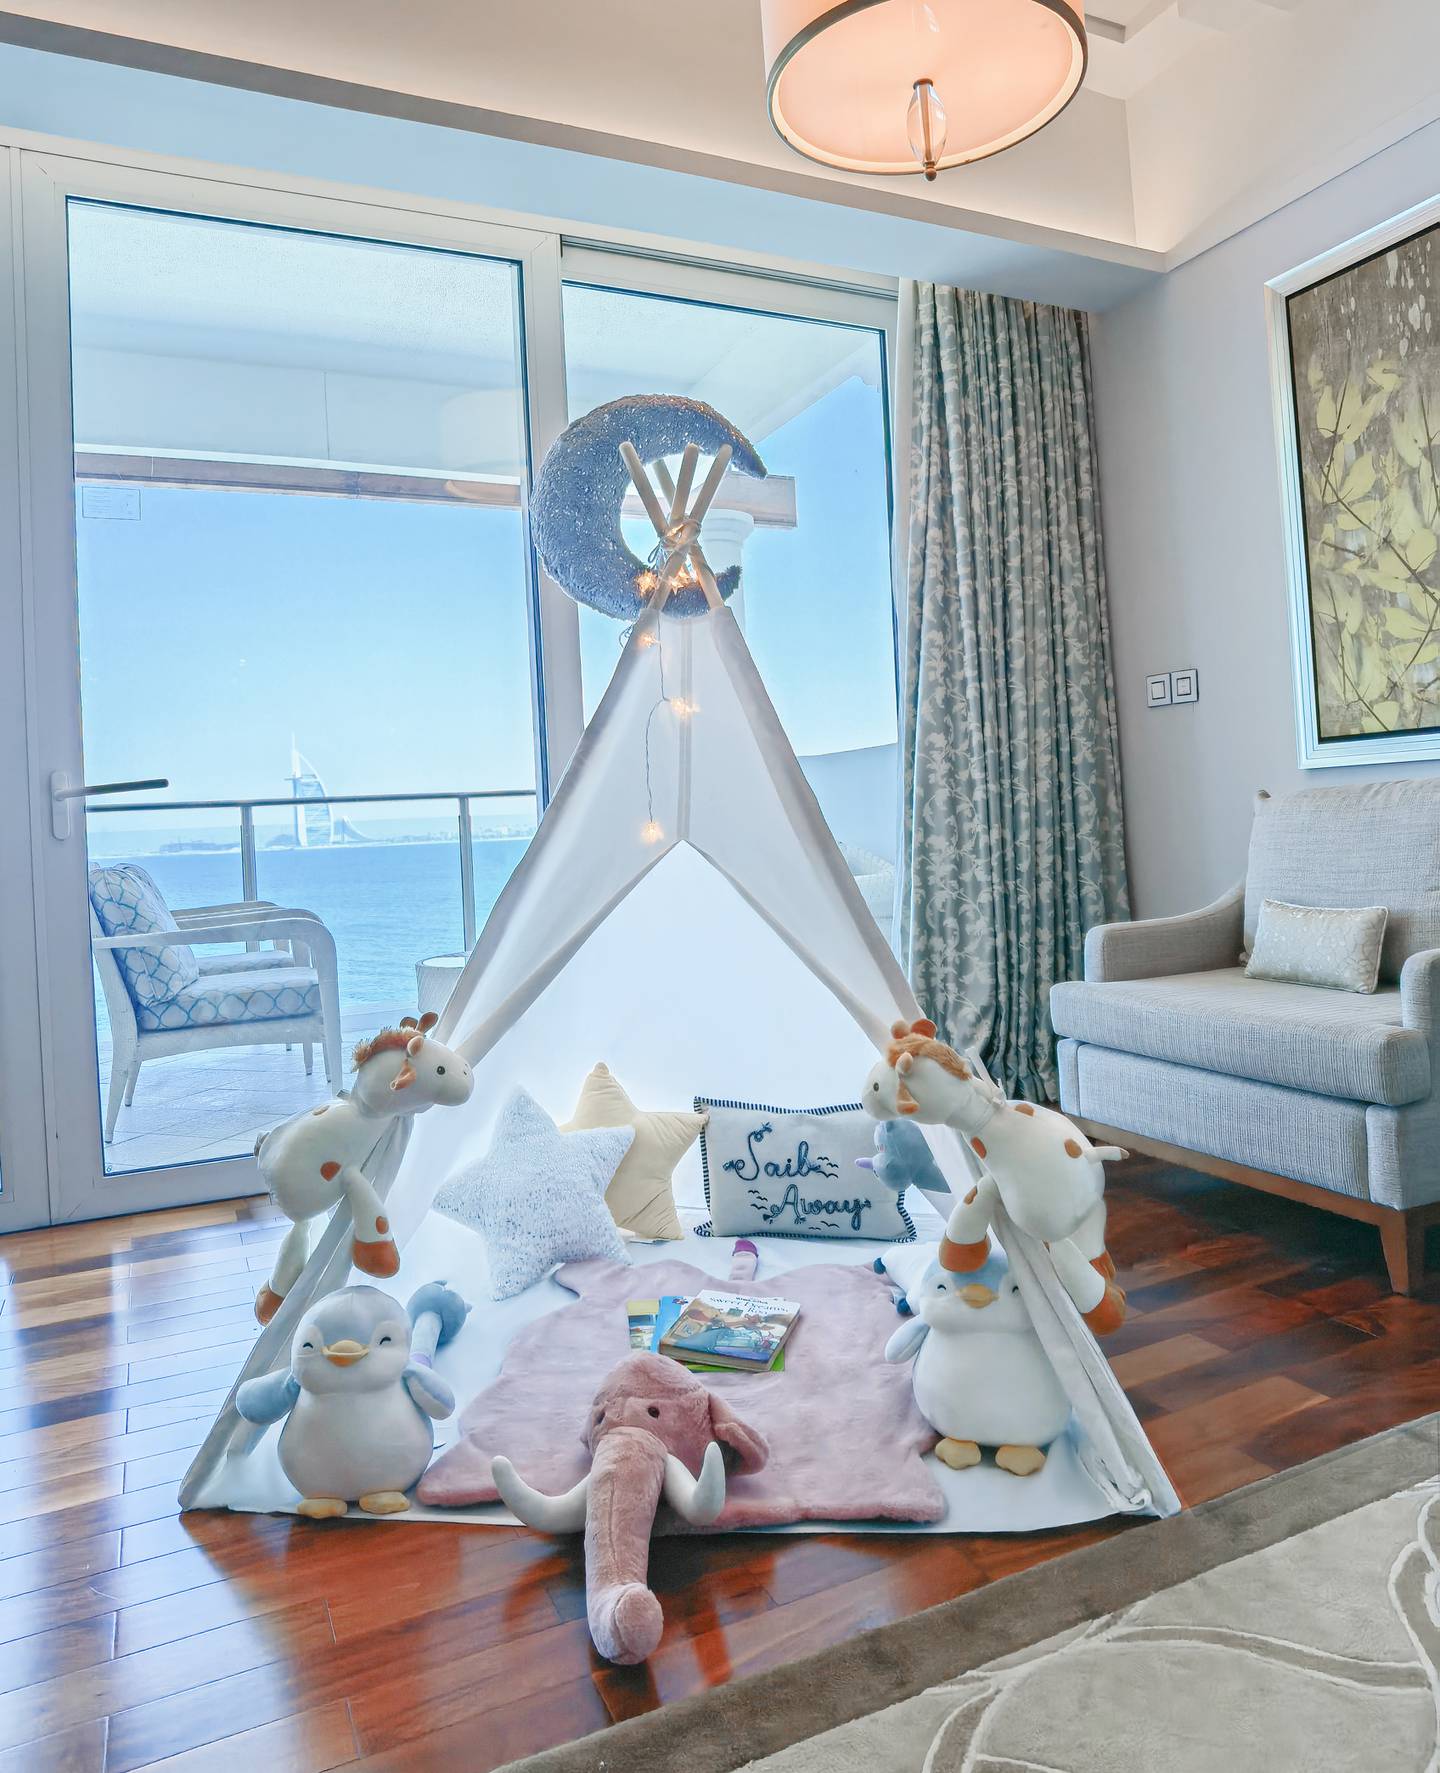 Waldorf Astoria Dubai Palm Jumeirah is offering a special Family Time package. Courtesy Waldorf Astoria Dubai Palm Jumeirah